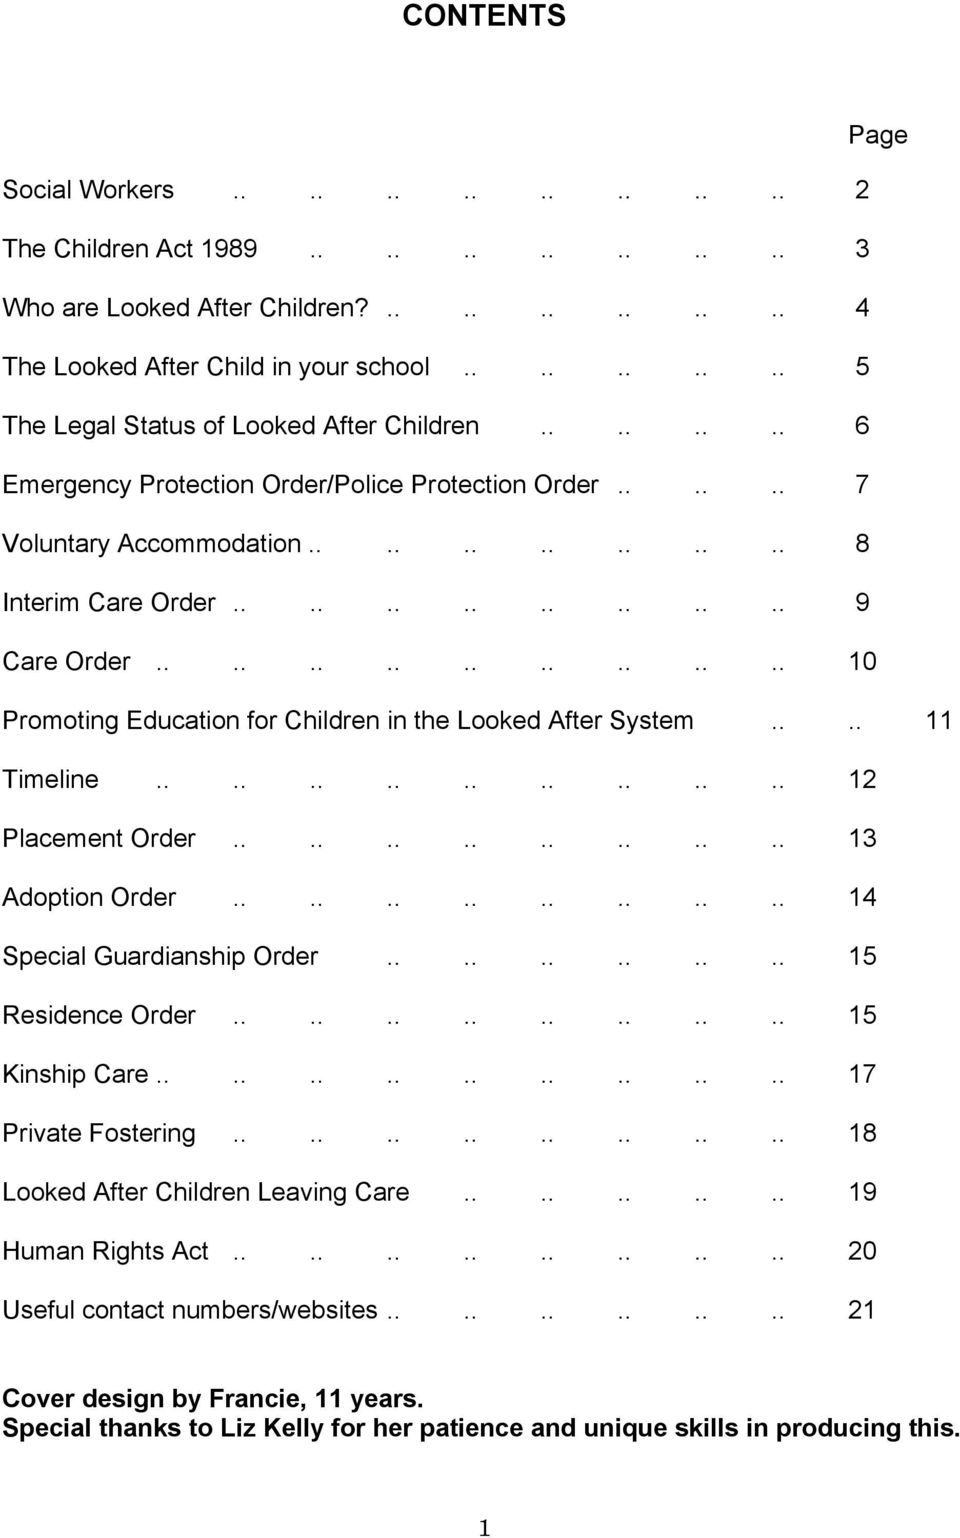 ................. 10 Promoting Education for Children in the Looked After System.... 11 Timeline.................. 12 Placement Order................ 13 Adoption Order................ 14 Special Guardianship Order.